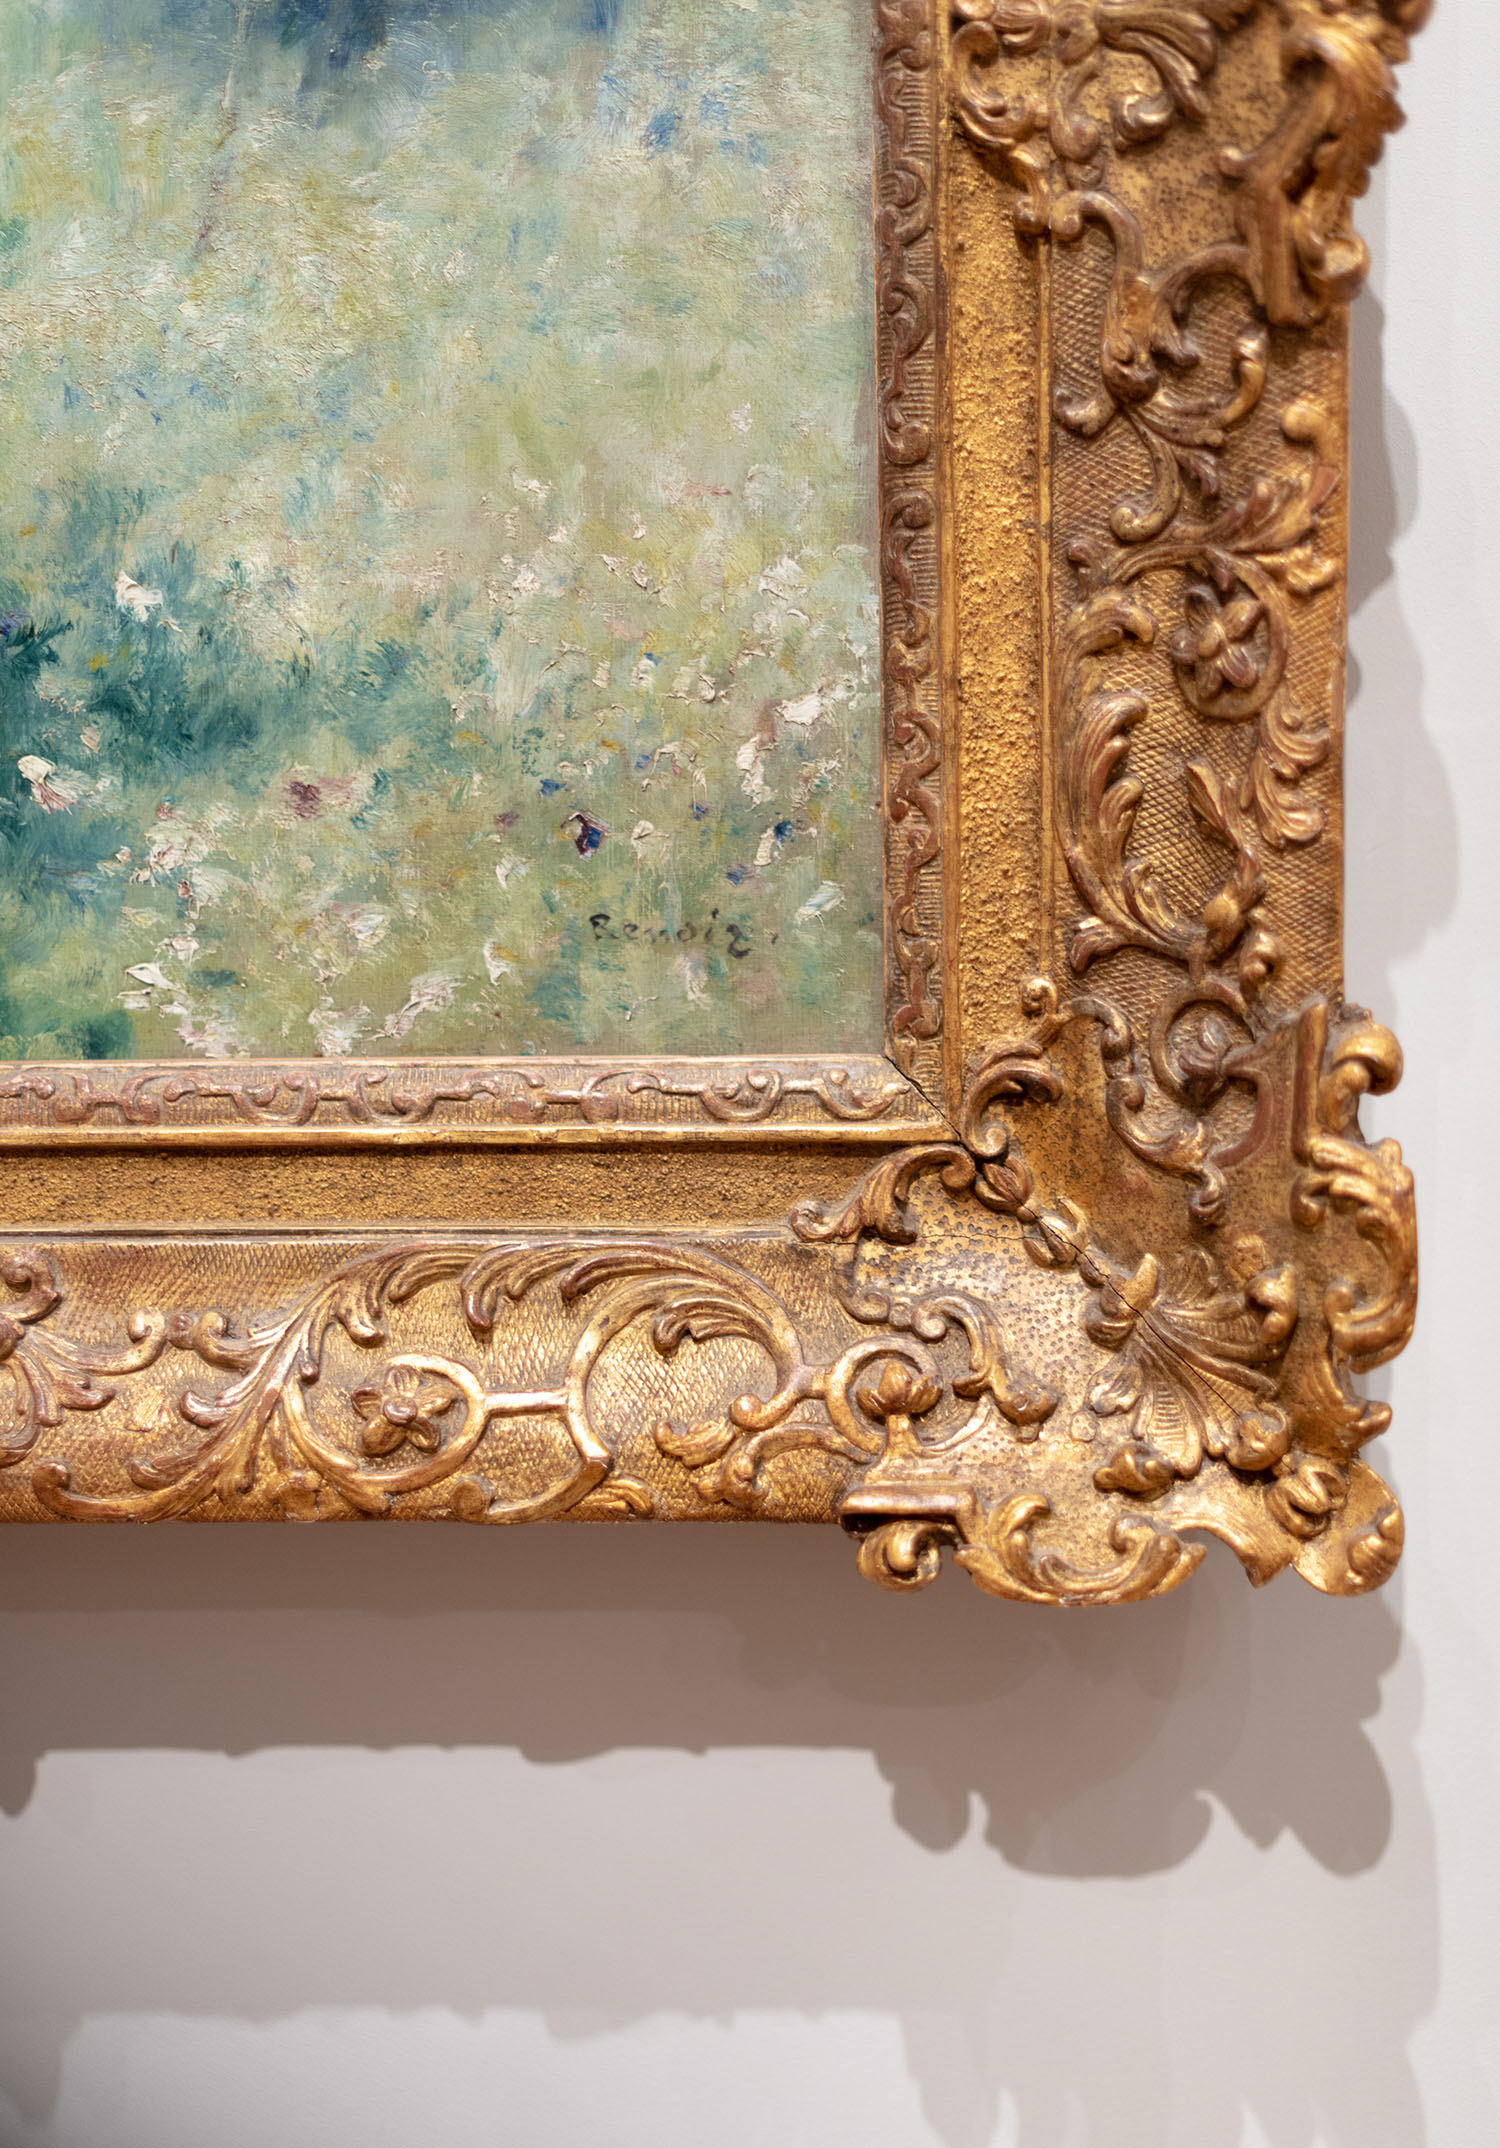 Coco & Vera - Monet painting at the Cortauld Gallery, London